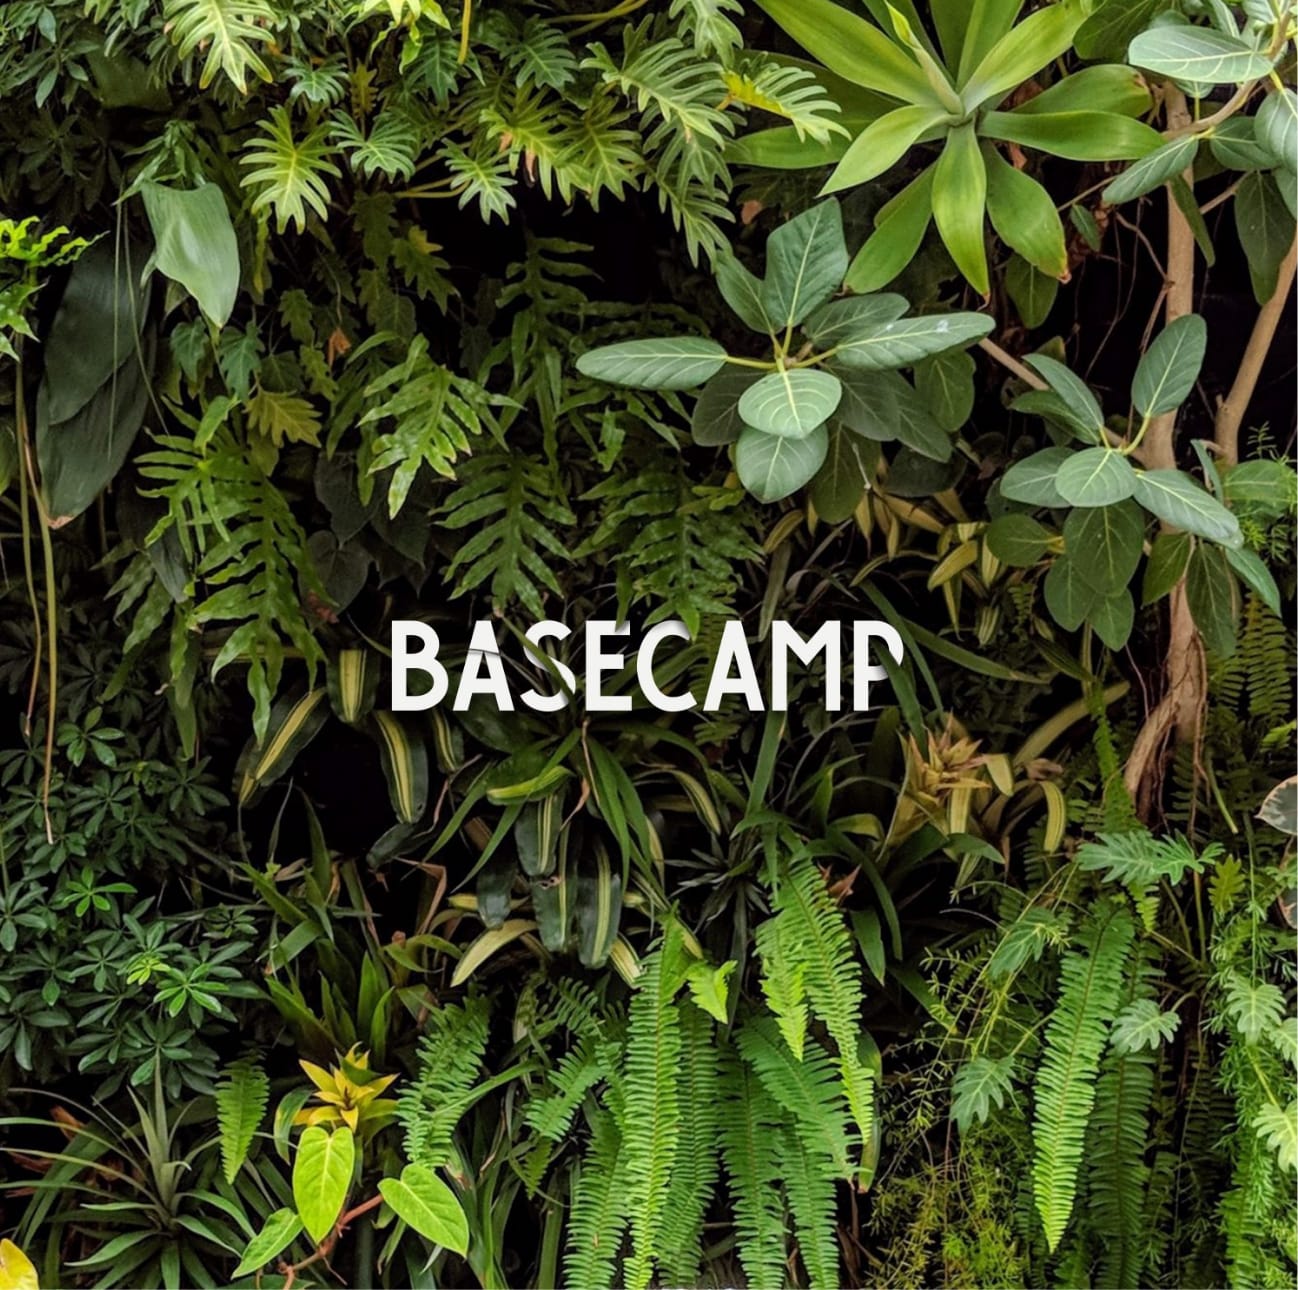 Large wall covered in various tropical green plants with the word "Basecamp" placed in the middle